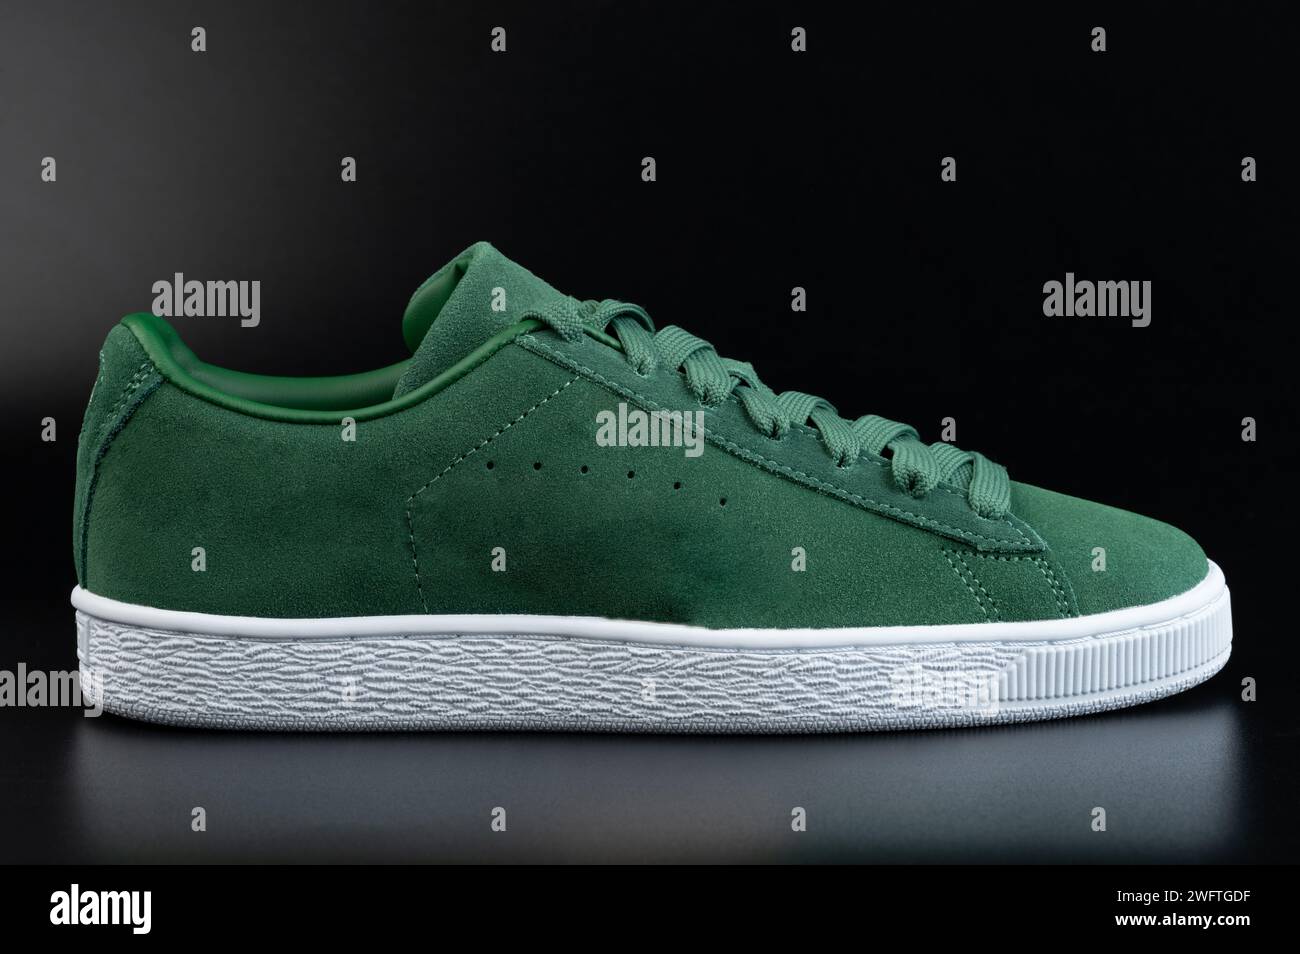 One green casual shoe with laces side view on black studio background Stock Photo